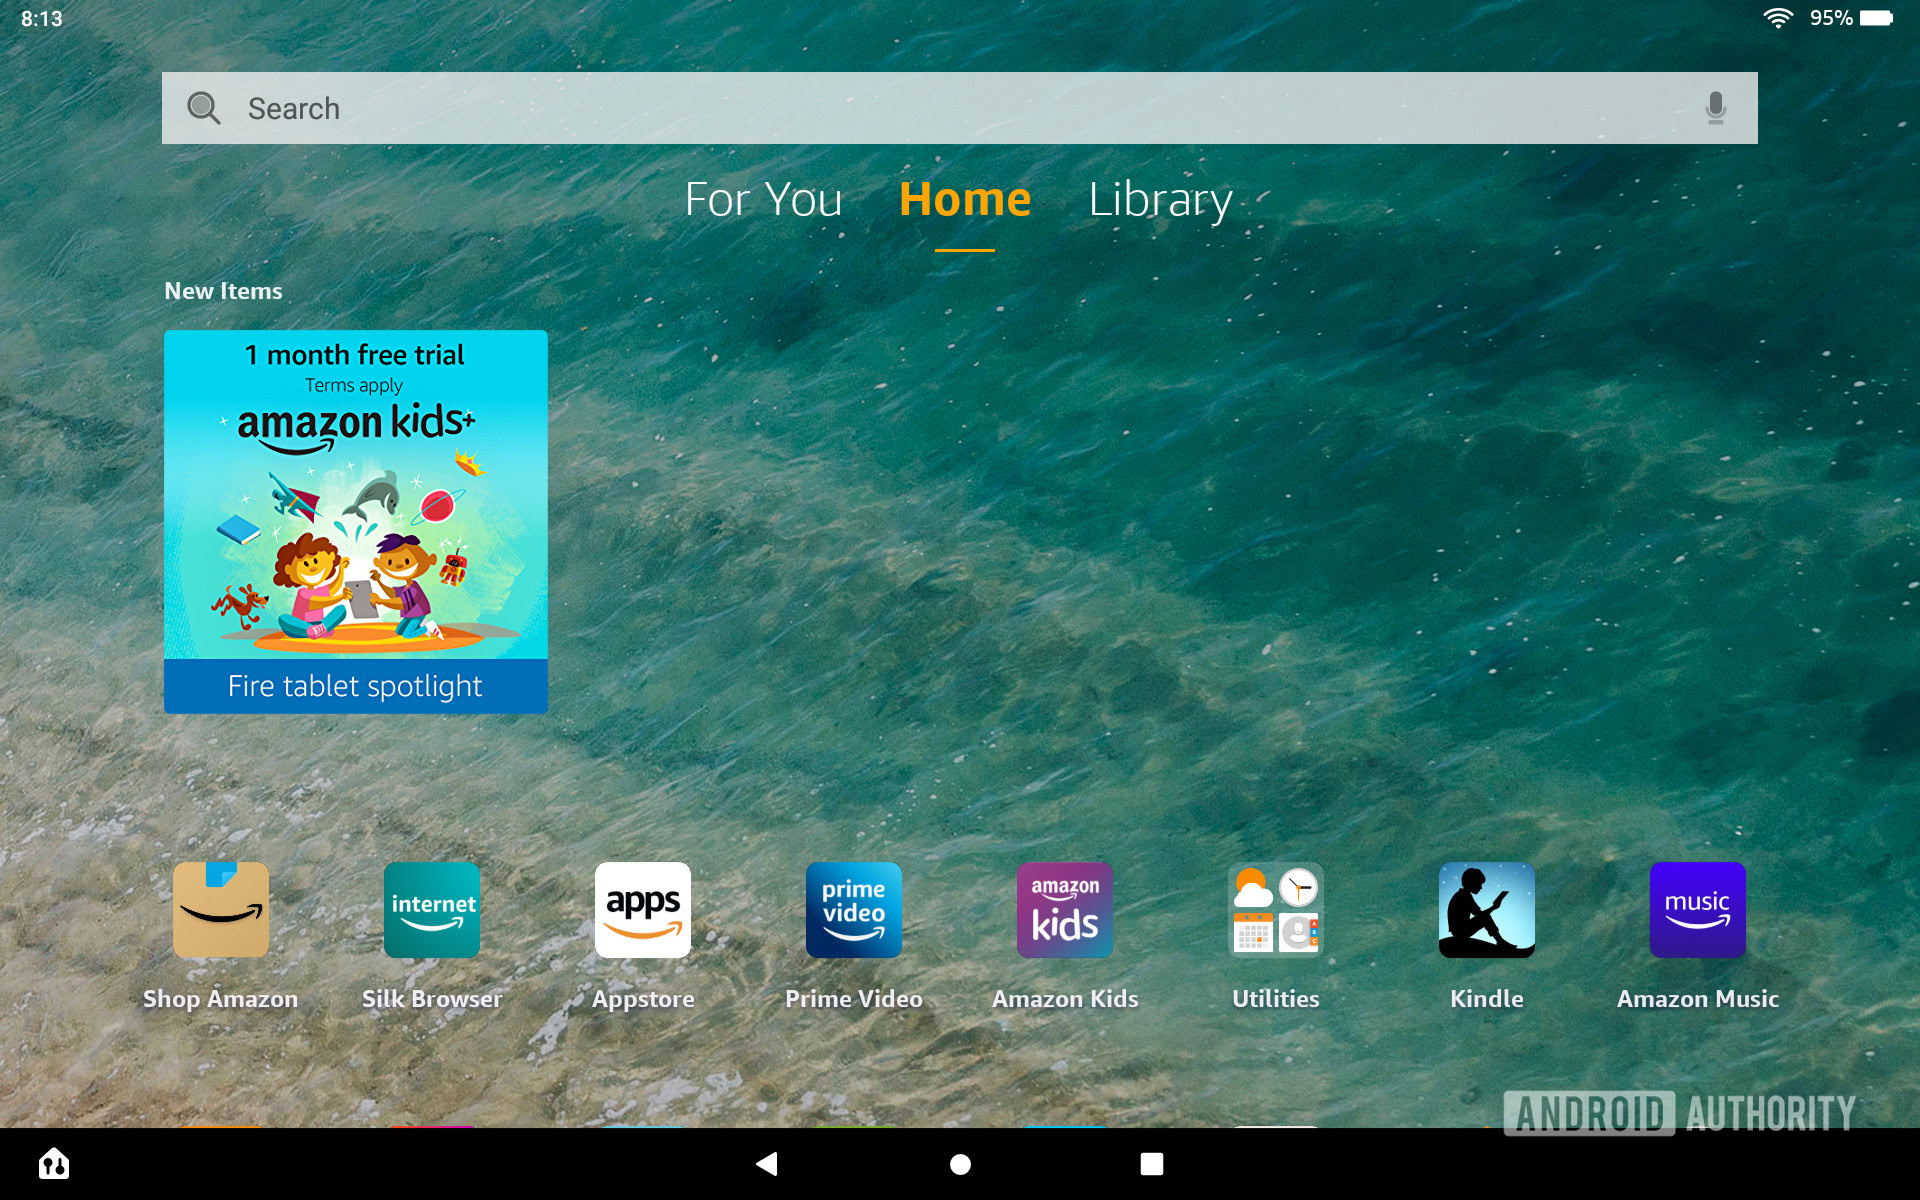 The Amazon Fire HD 10 Plus home screen with Kids+ app suggestion.